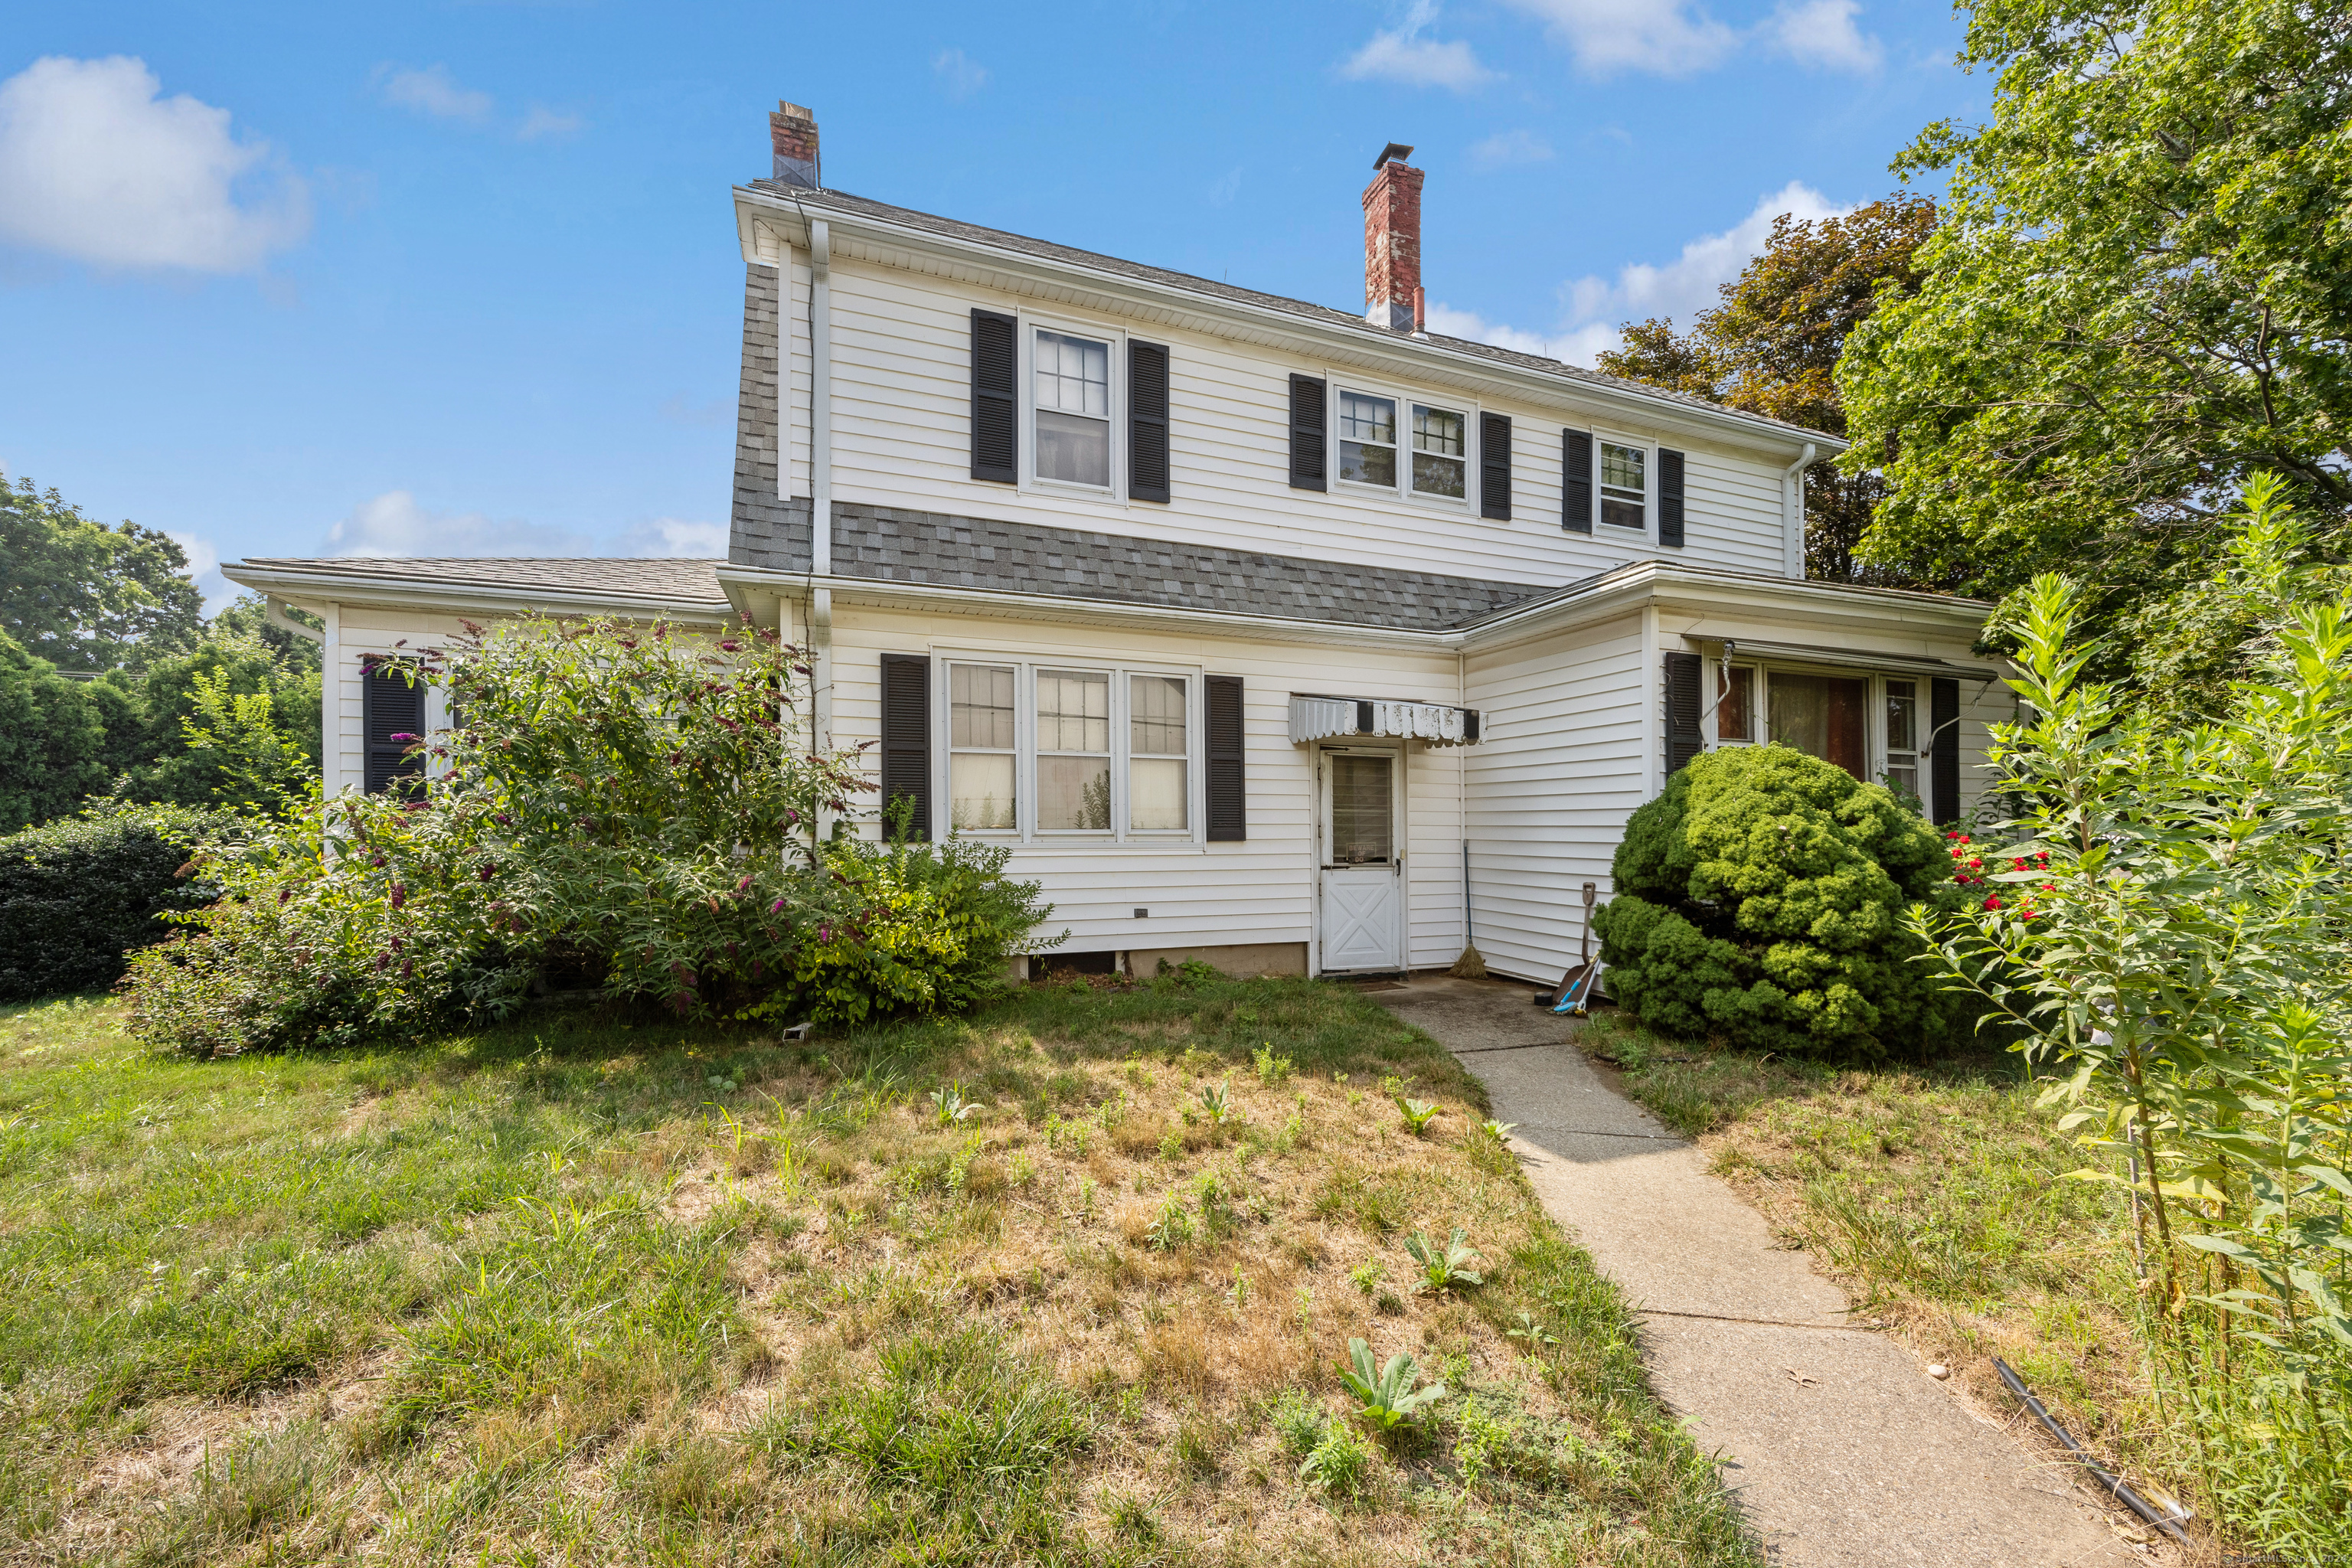 1170 Main Street, South Windsor, Connecticut - 3 Bedrooms  
2 Bathrooms  
7 Rooms - 